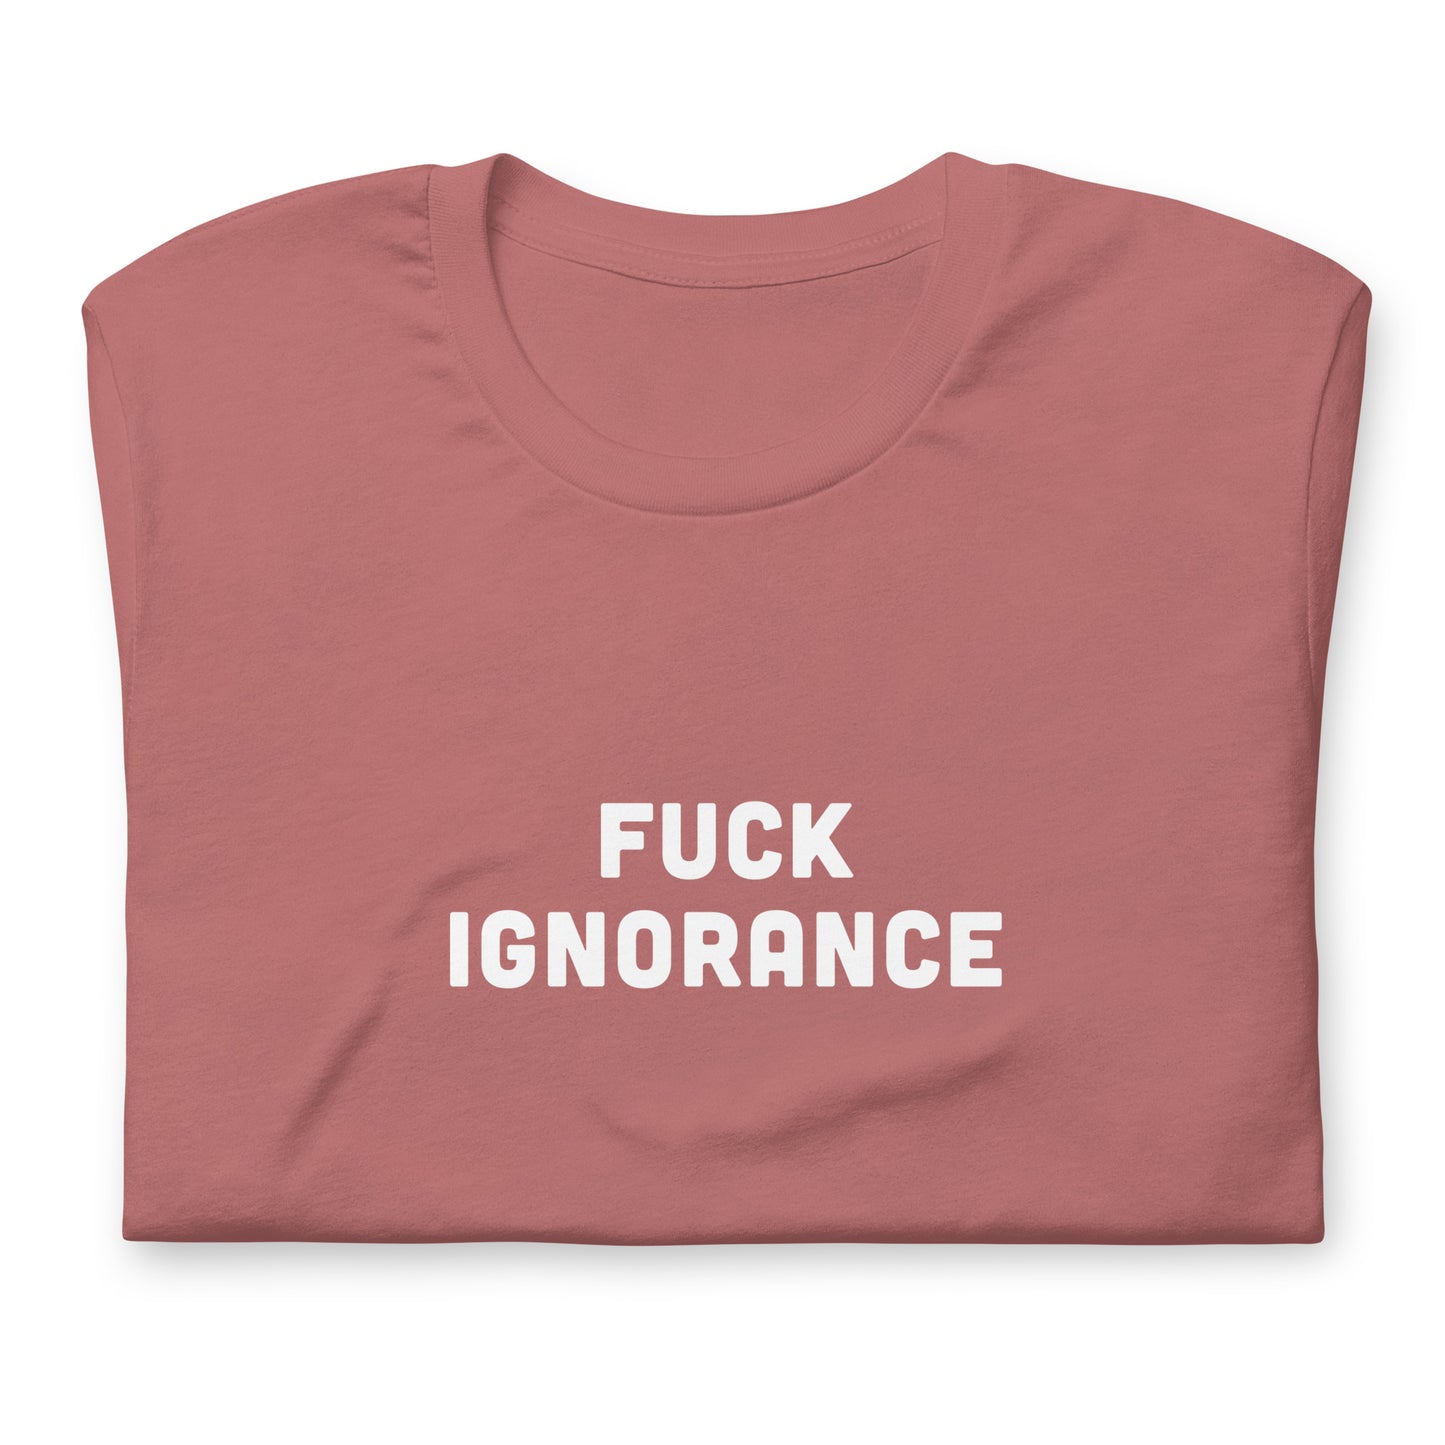 Fuck Ignorance T-Shirt Size 2XL Color Navy